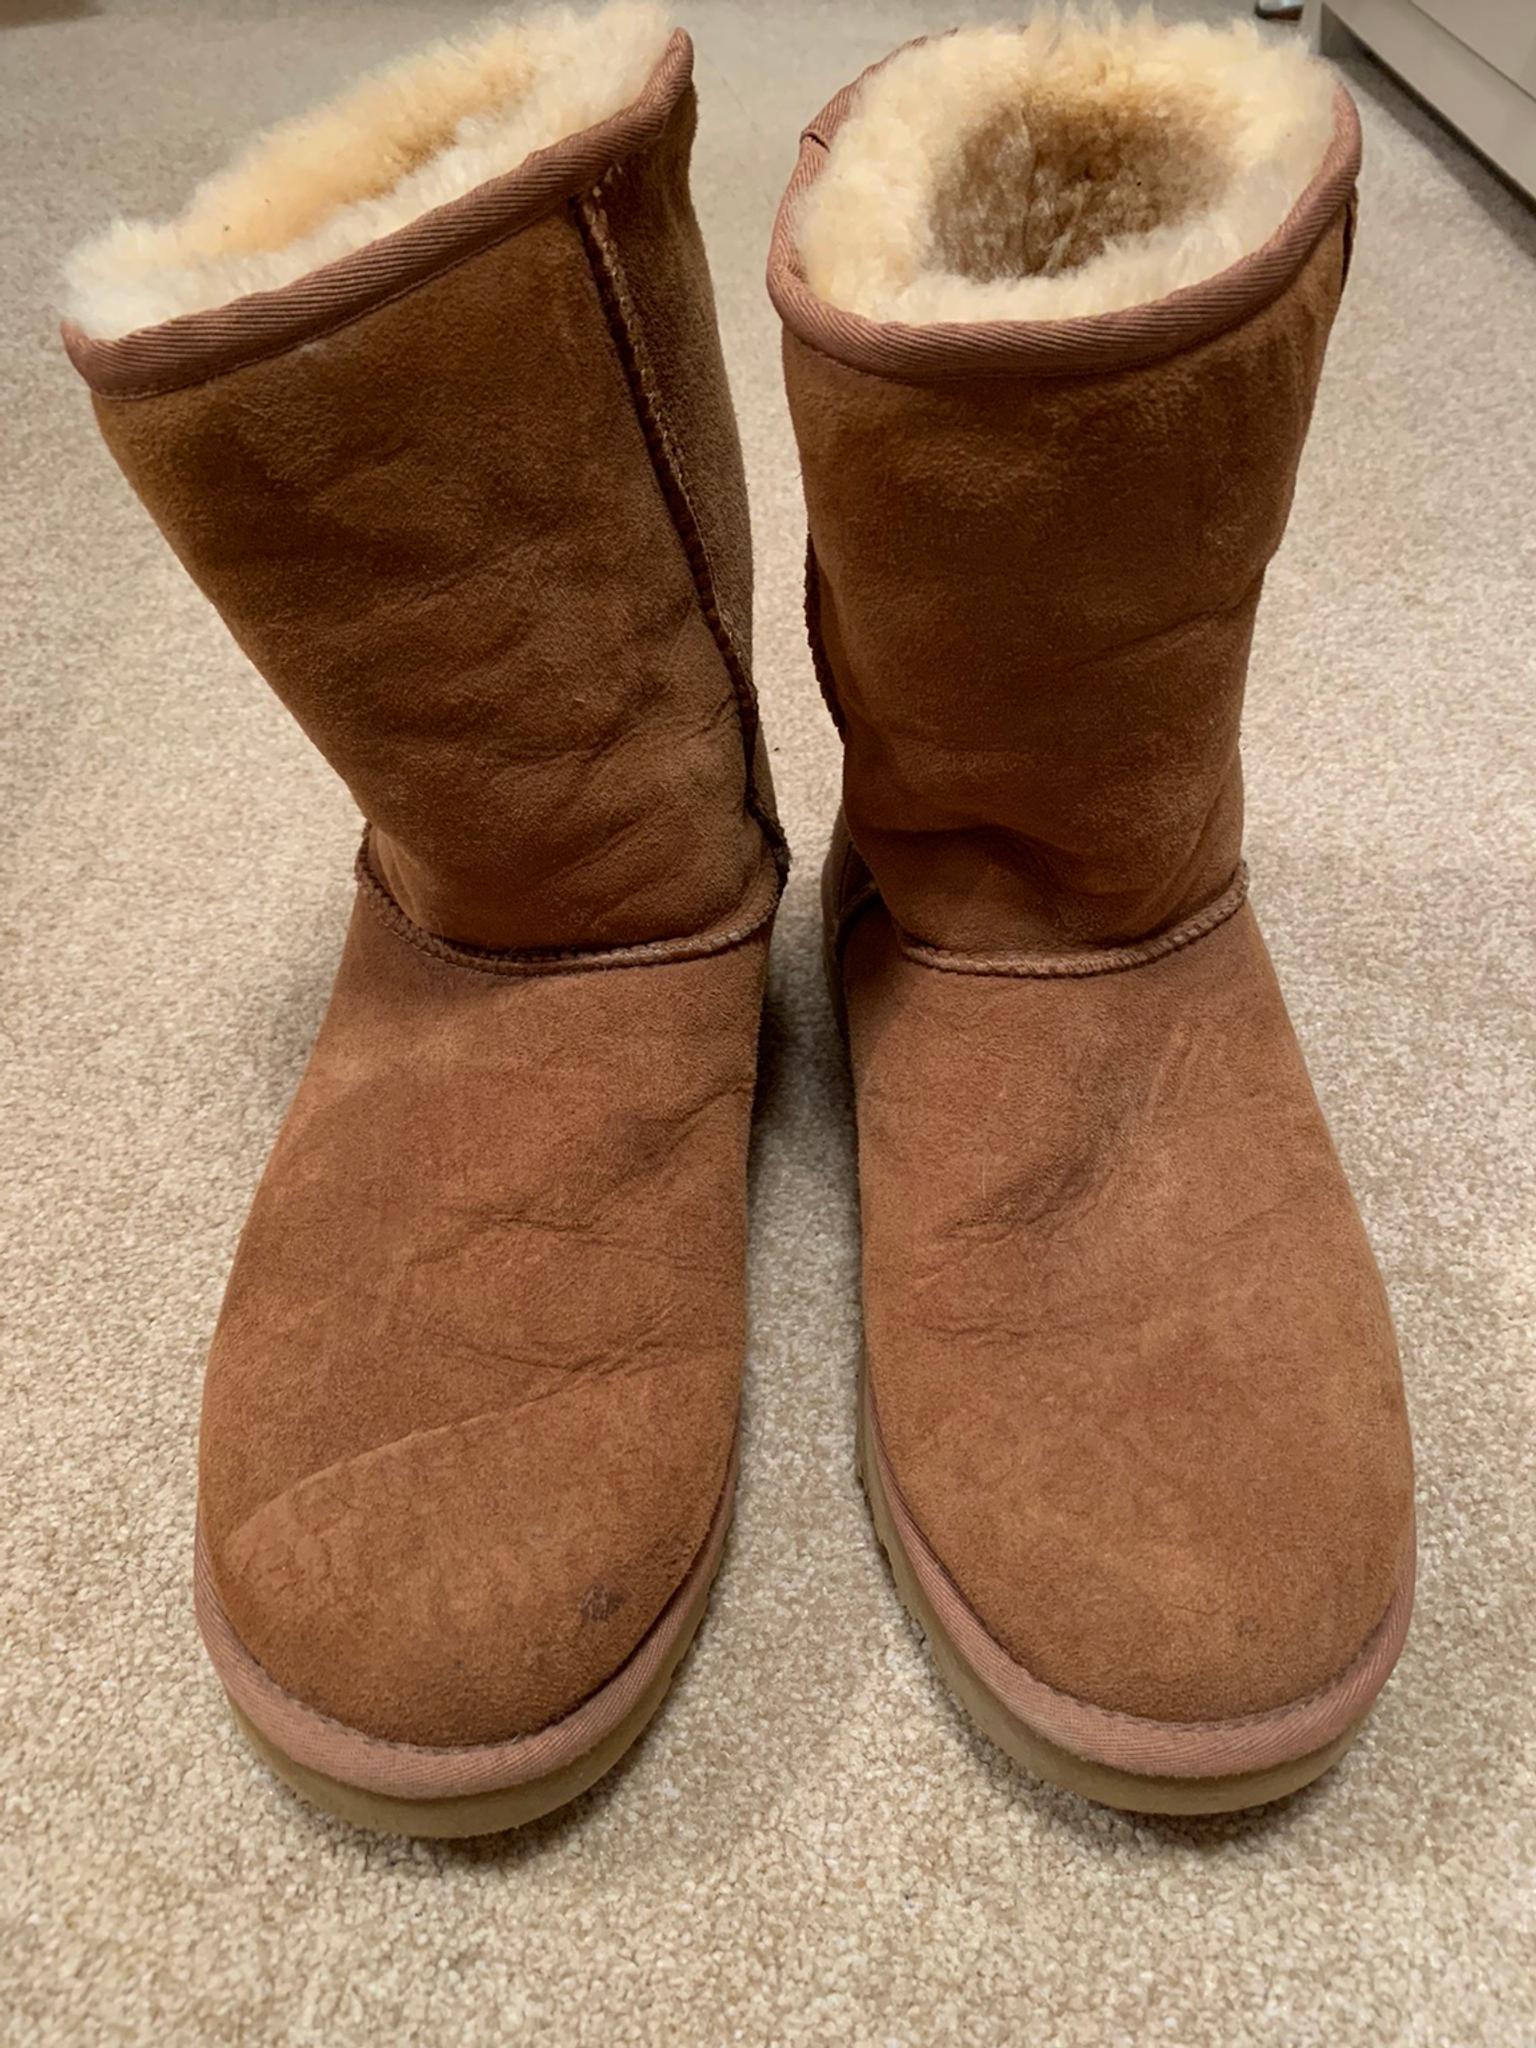 mens uggs size 9